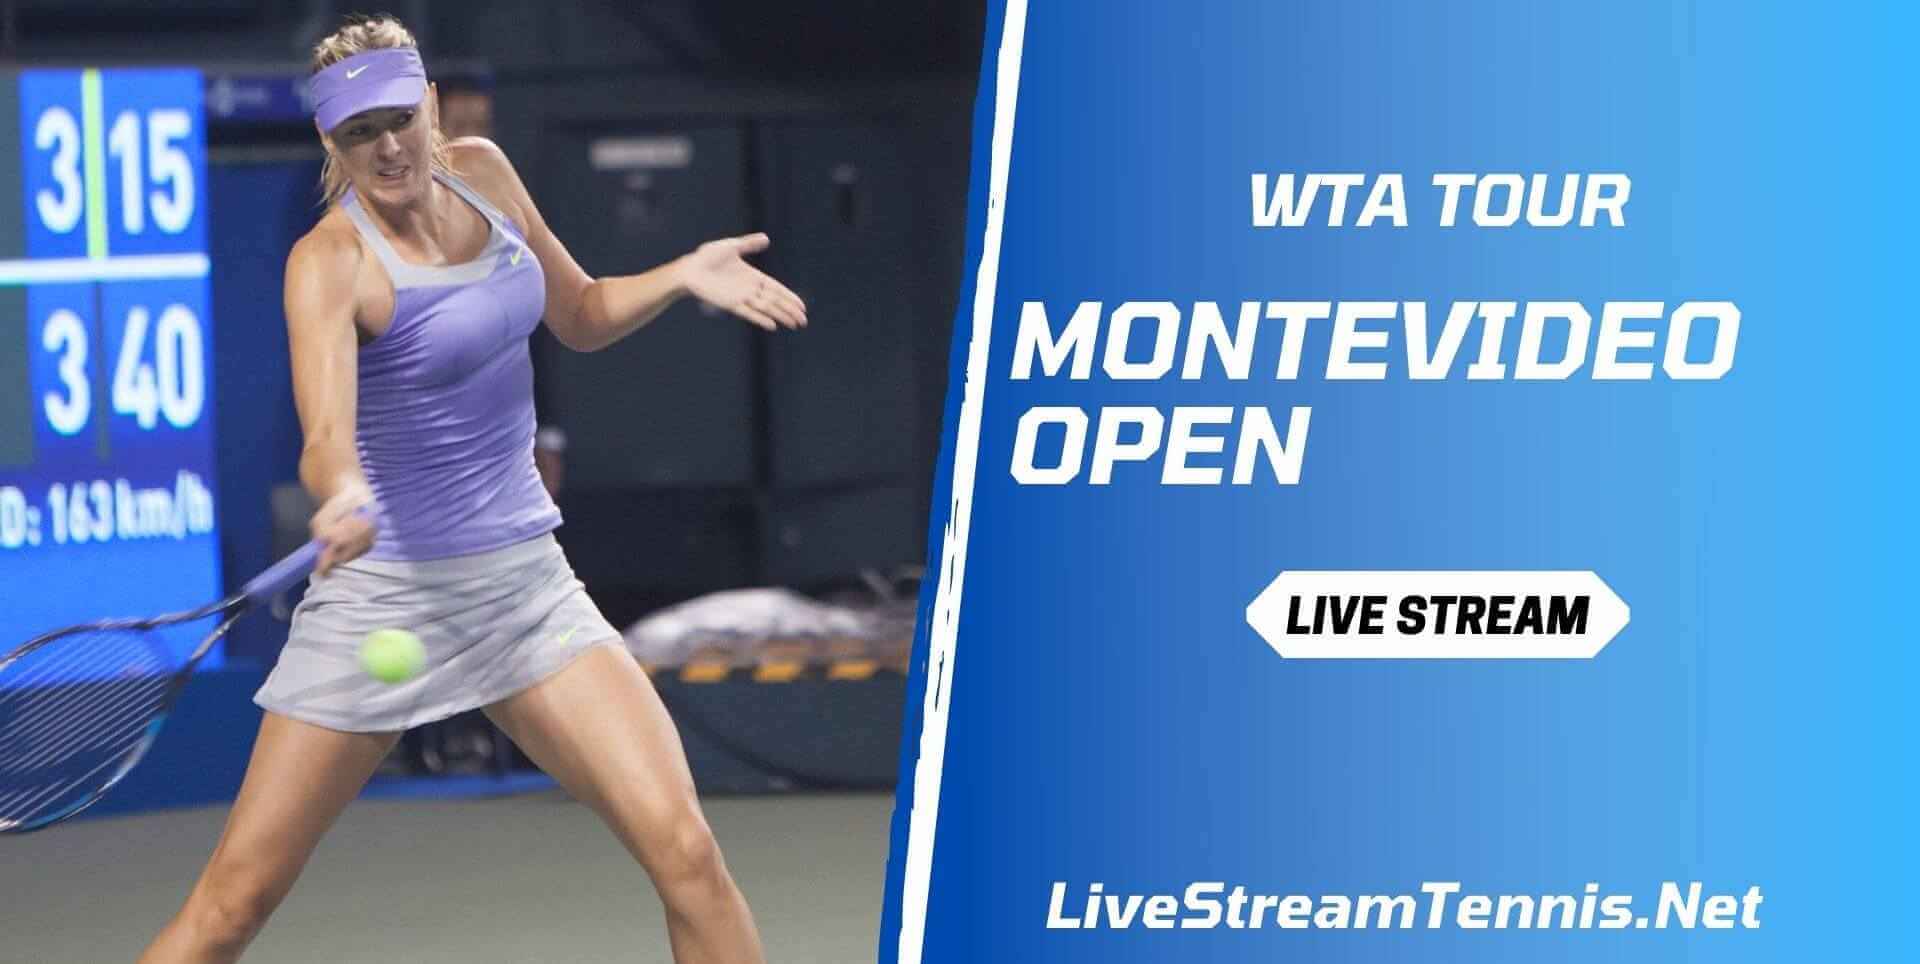 montevideo-open-tennis-live-streaming